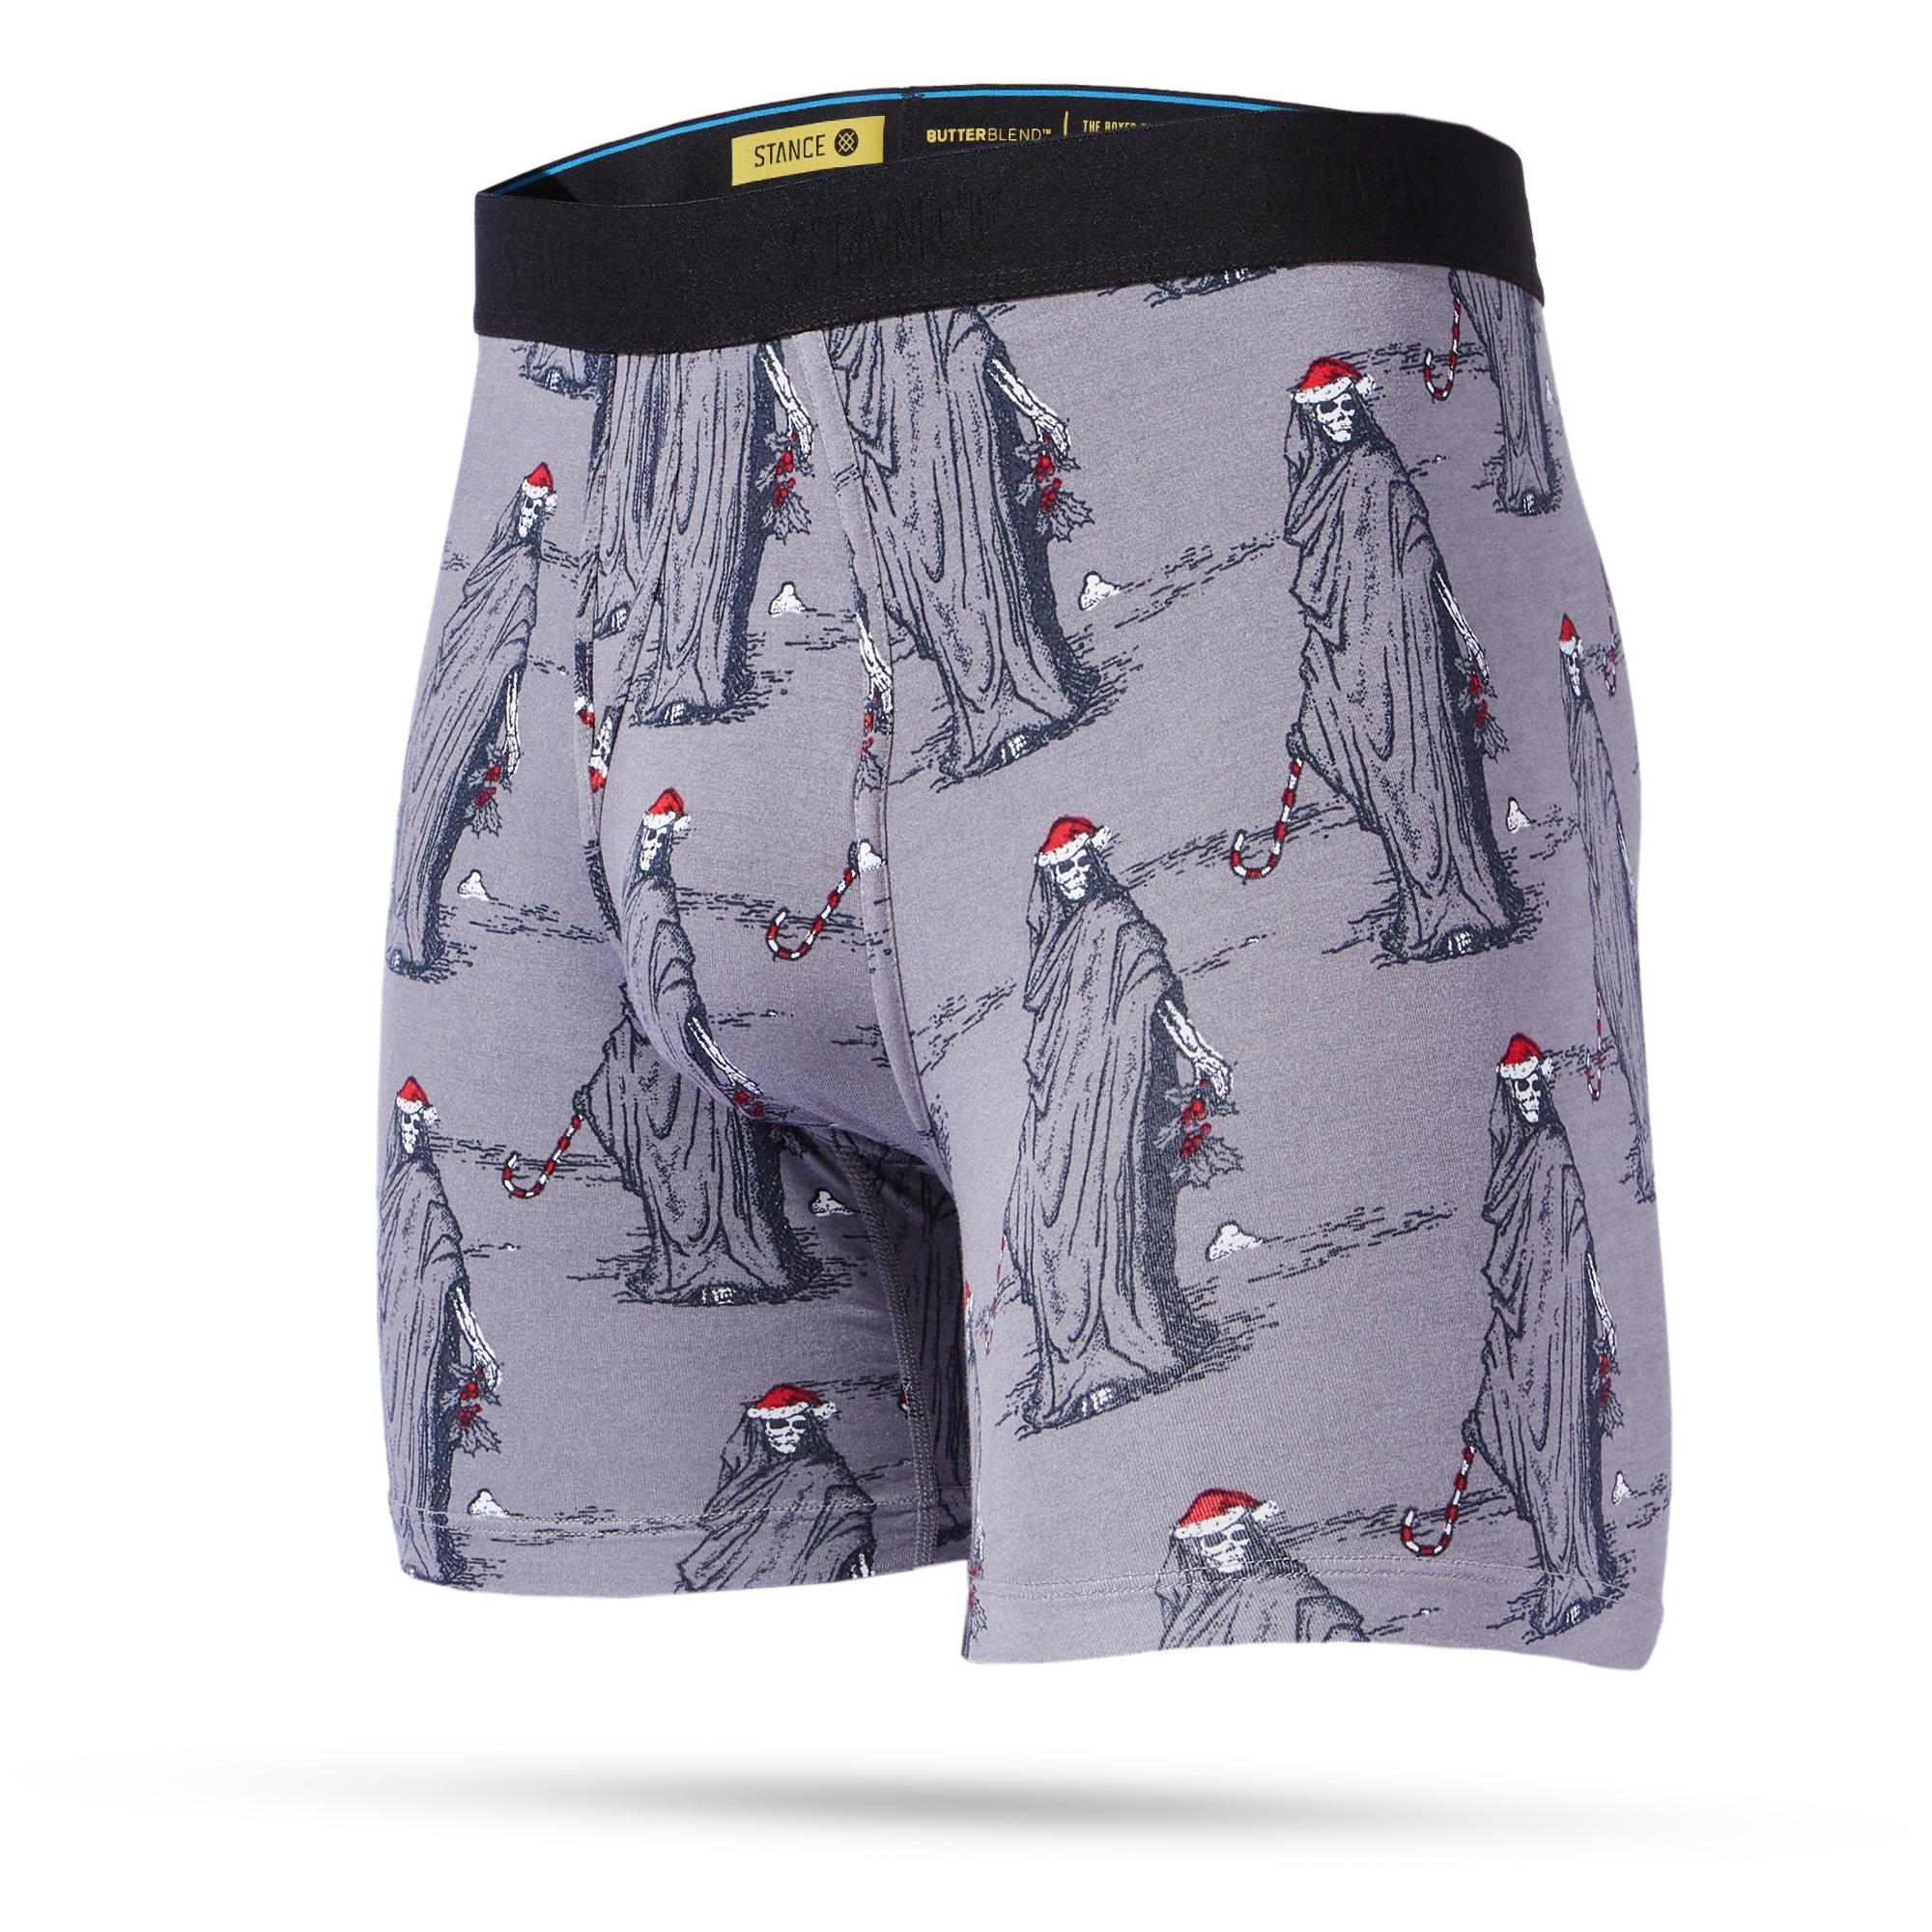 Stance Wholester Hive - Wu-Tang Boxer Breifs Men's Underwear Small